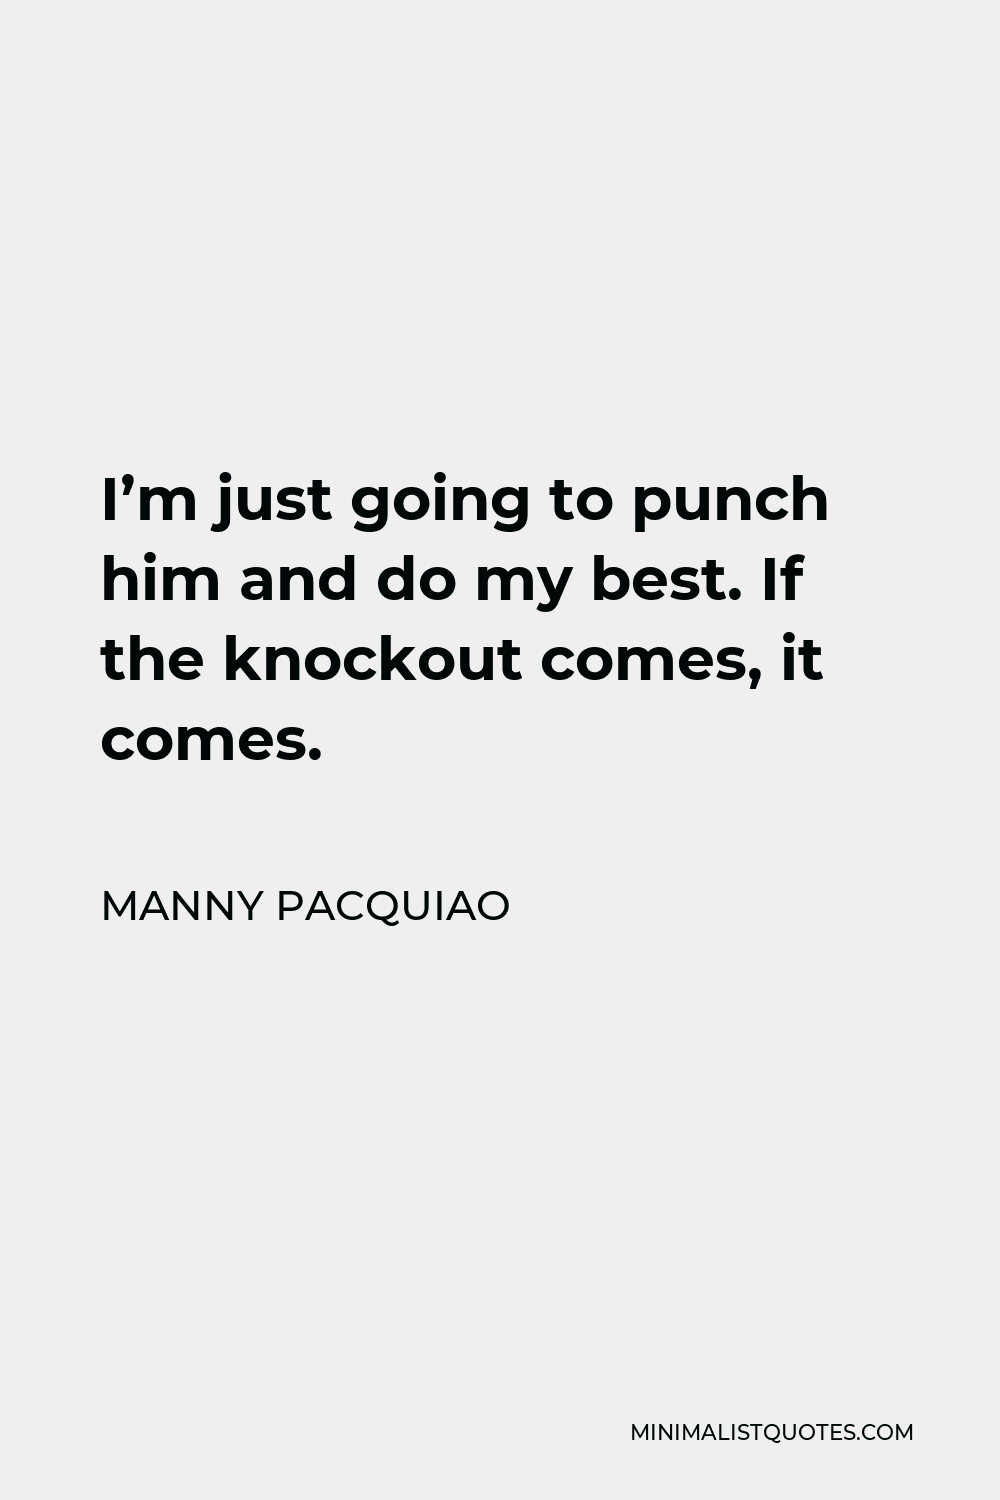 Manny Pacquiao Quote - I’m just going to punch him and do my best. If the knockout comes, it comes.